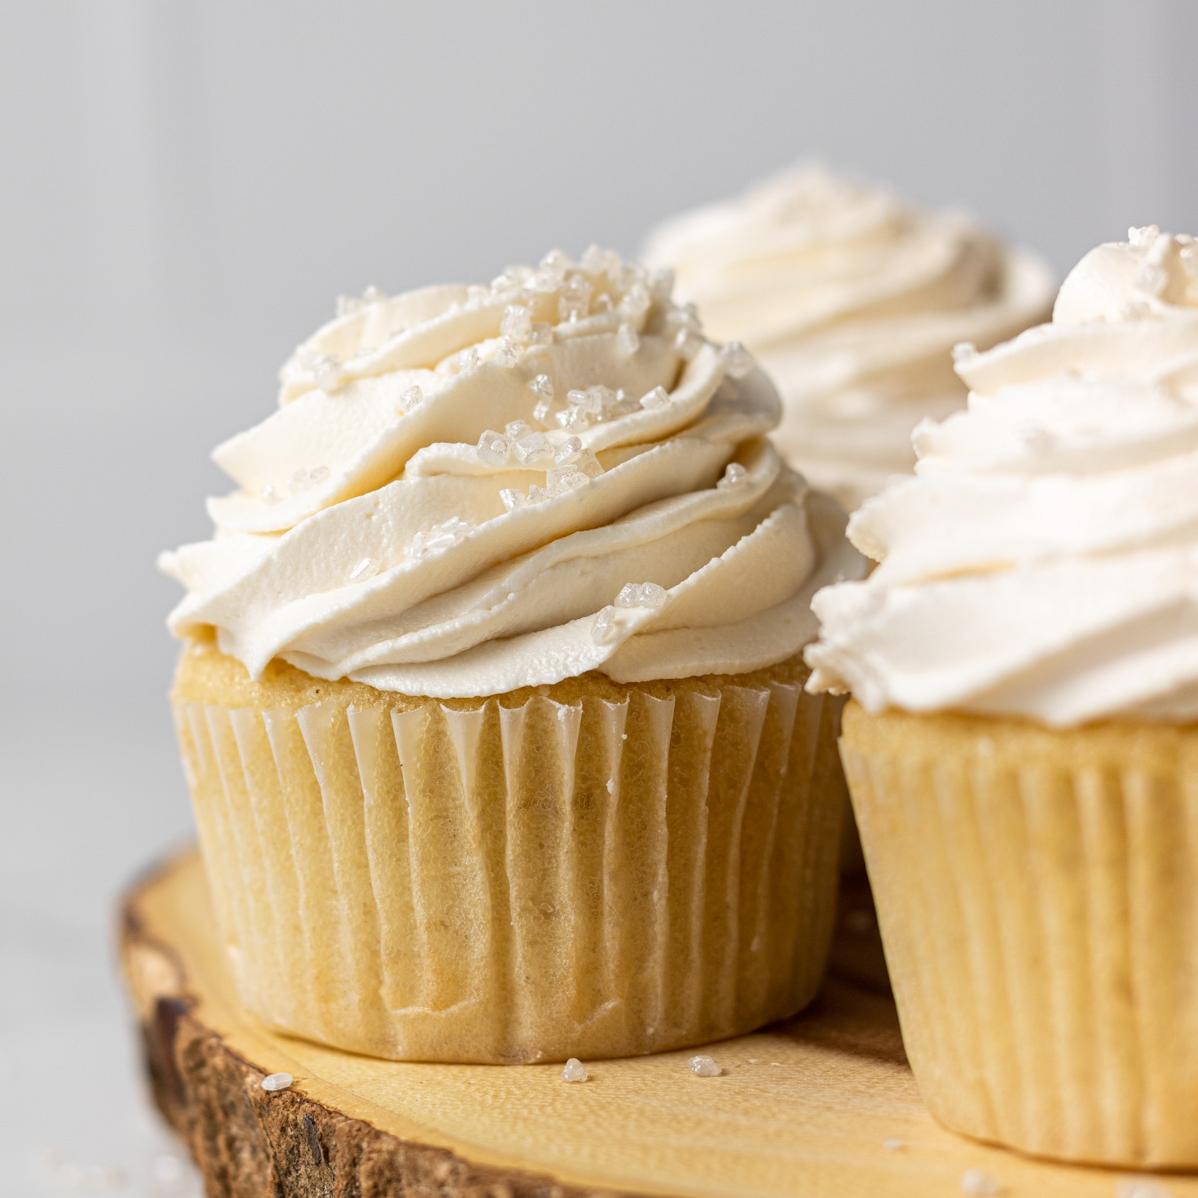  Get ready for a sweet treat with our Bakery-style Vanilla Cupcakes.